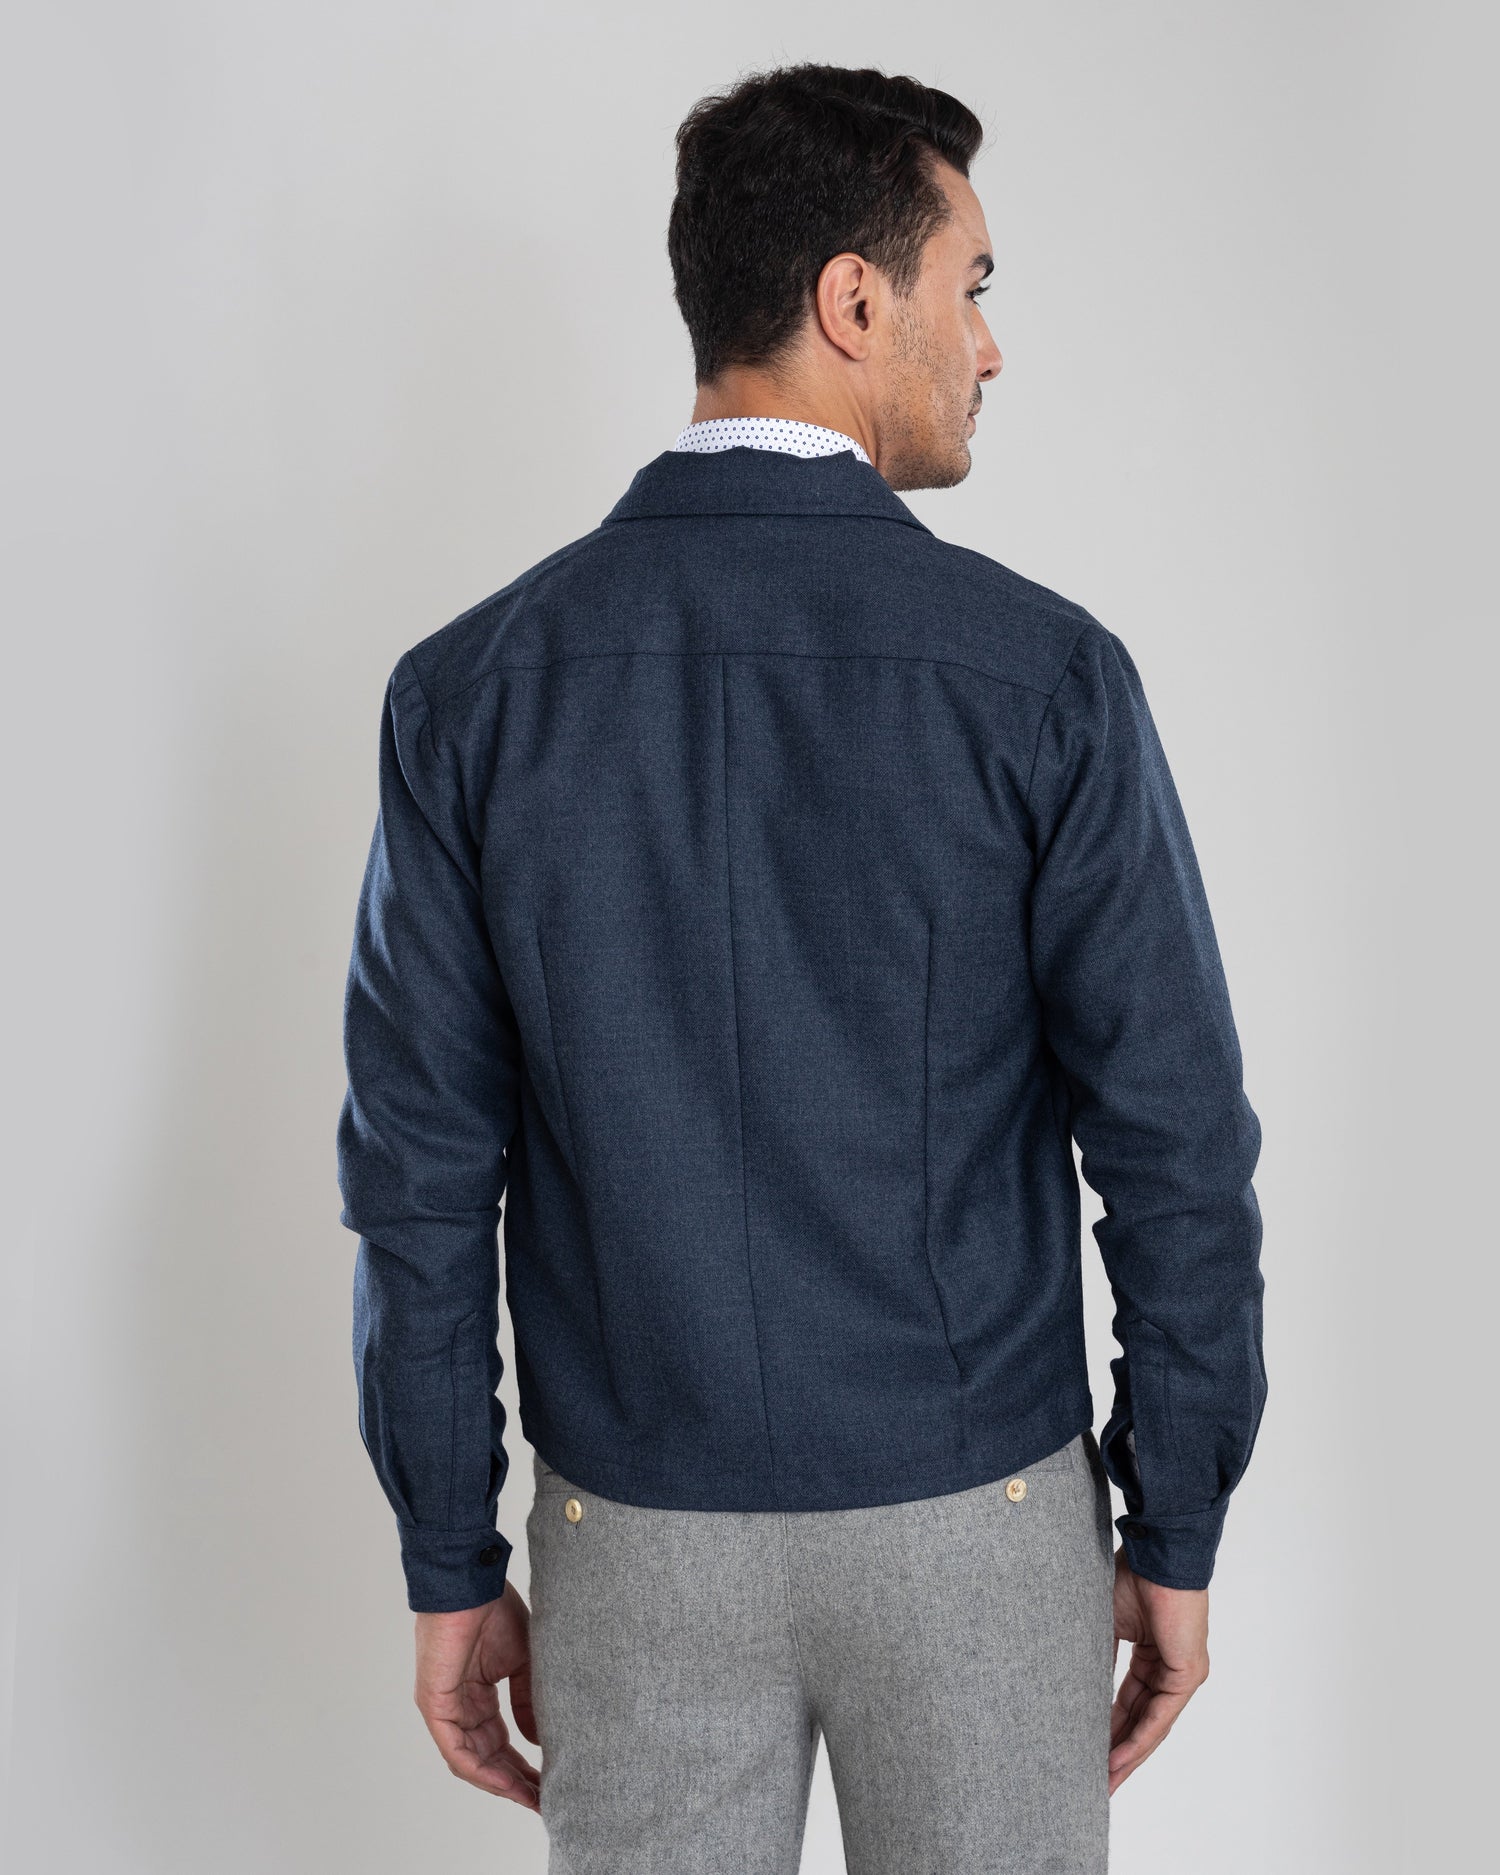 Back of model wearing the wool flannel shirt jacket for men by Luxire in dugdale navy